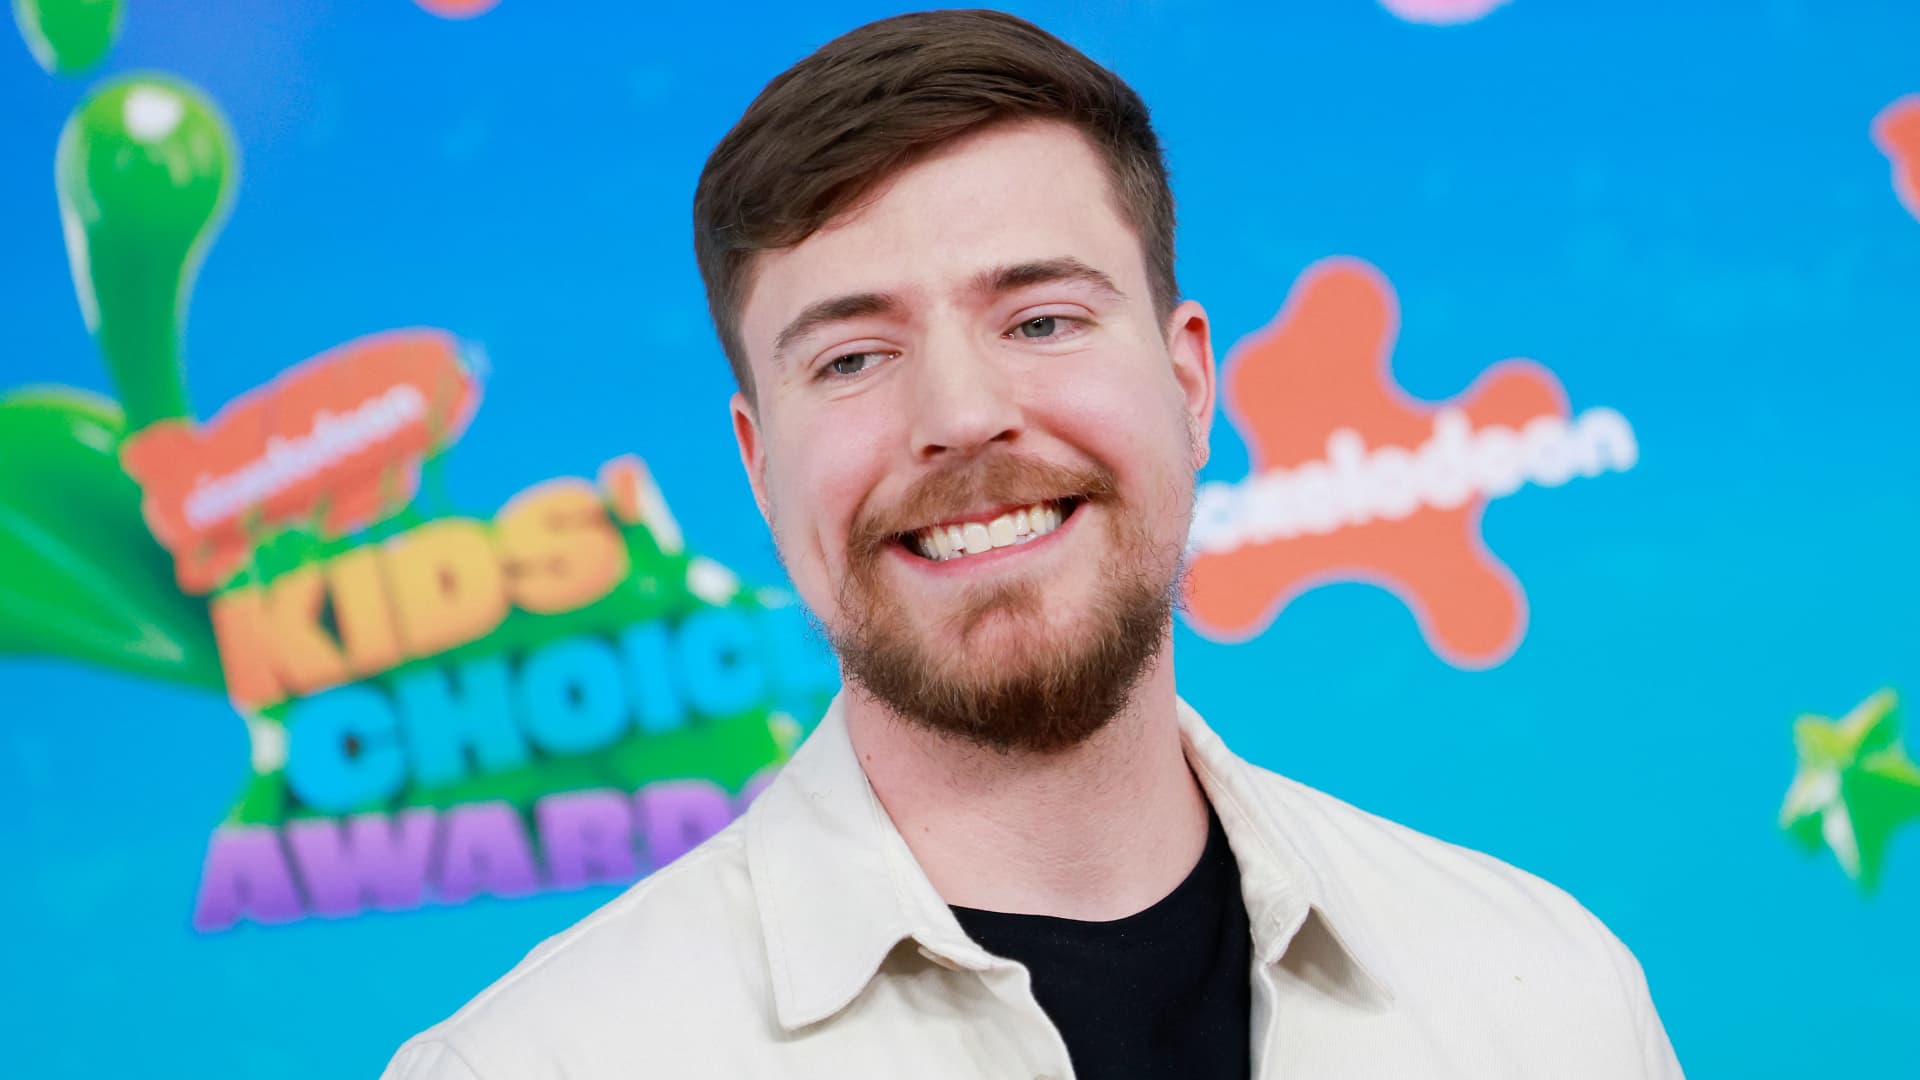 YouTube star MrBeast makes more than 3,000 in X video, but calls it ‘a bit of a facade’